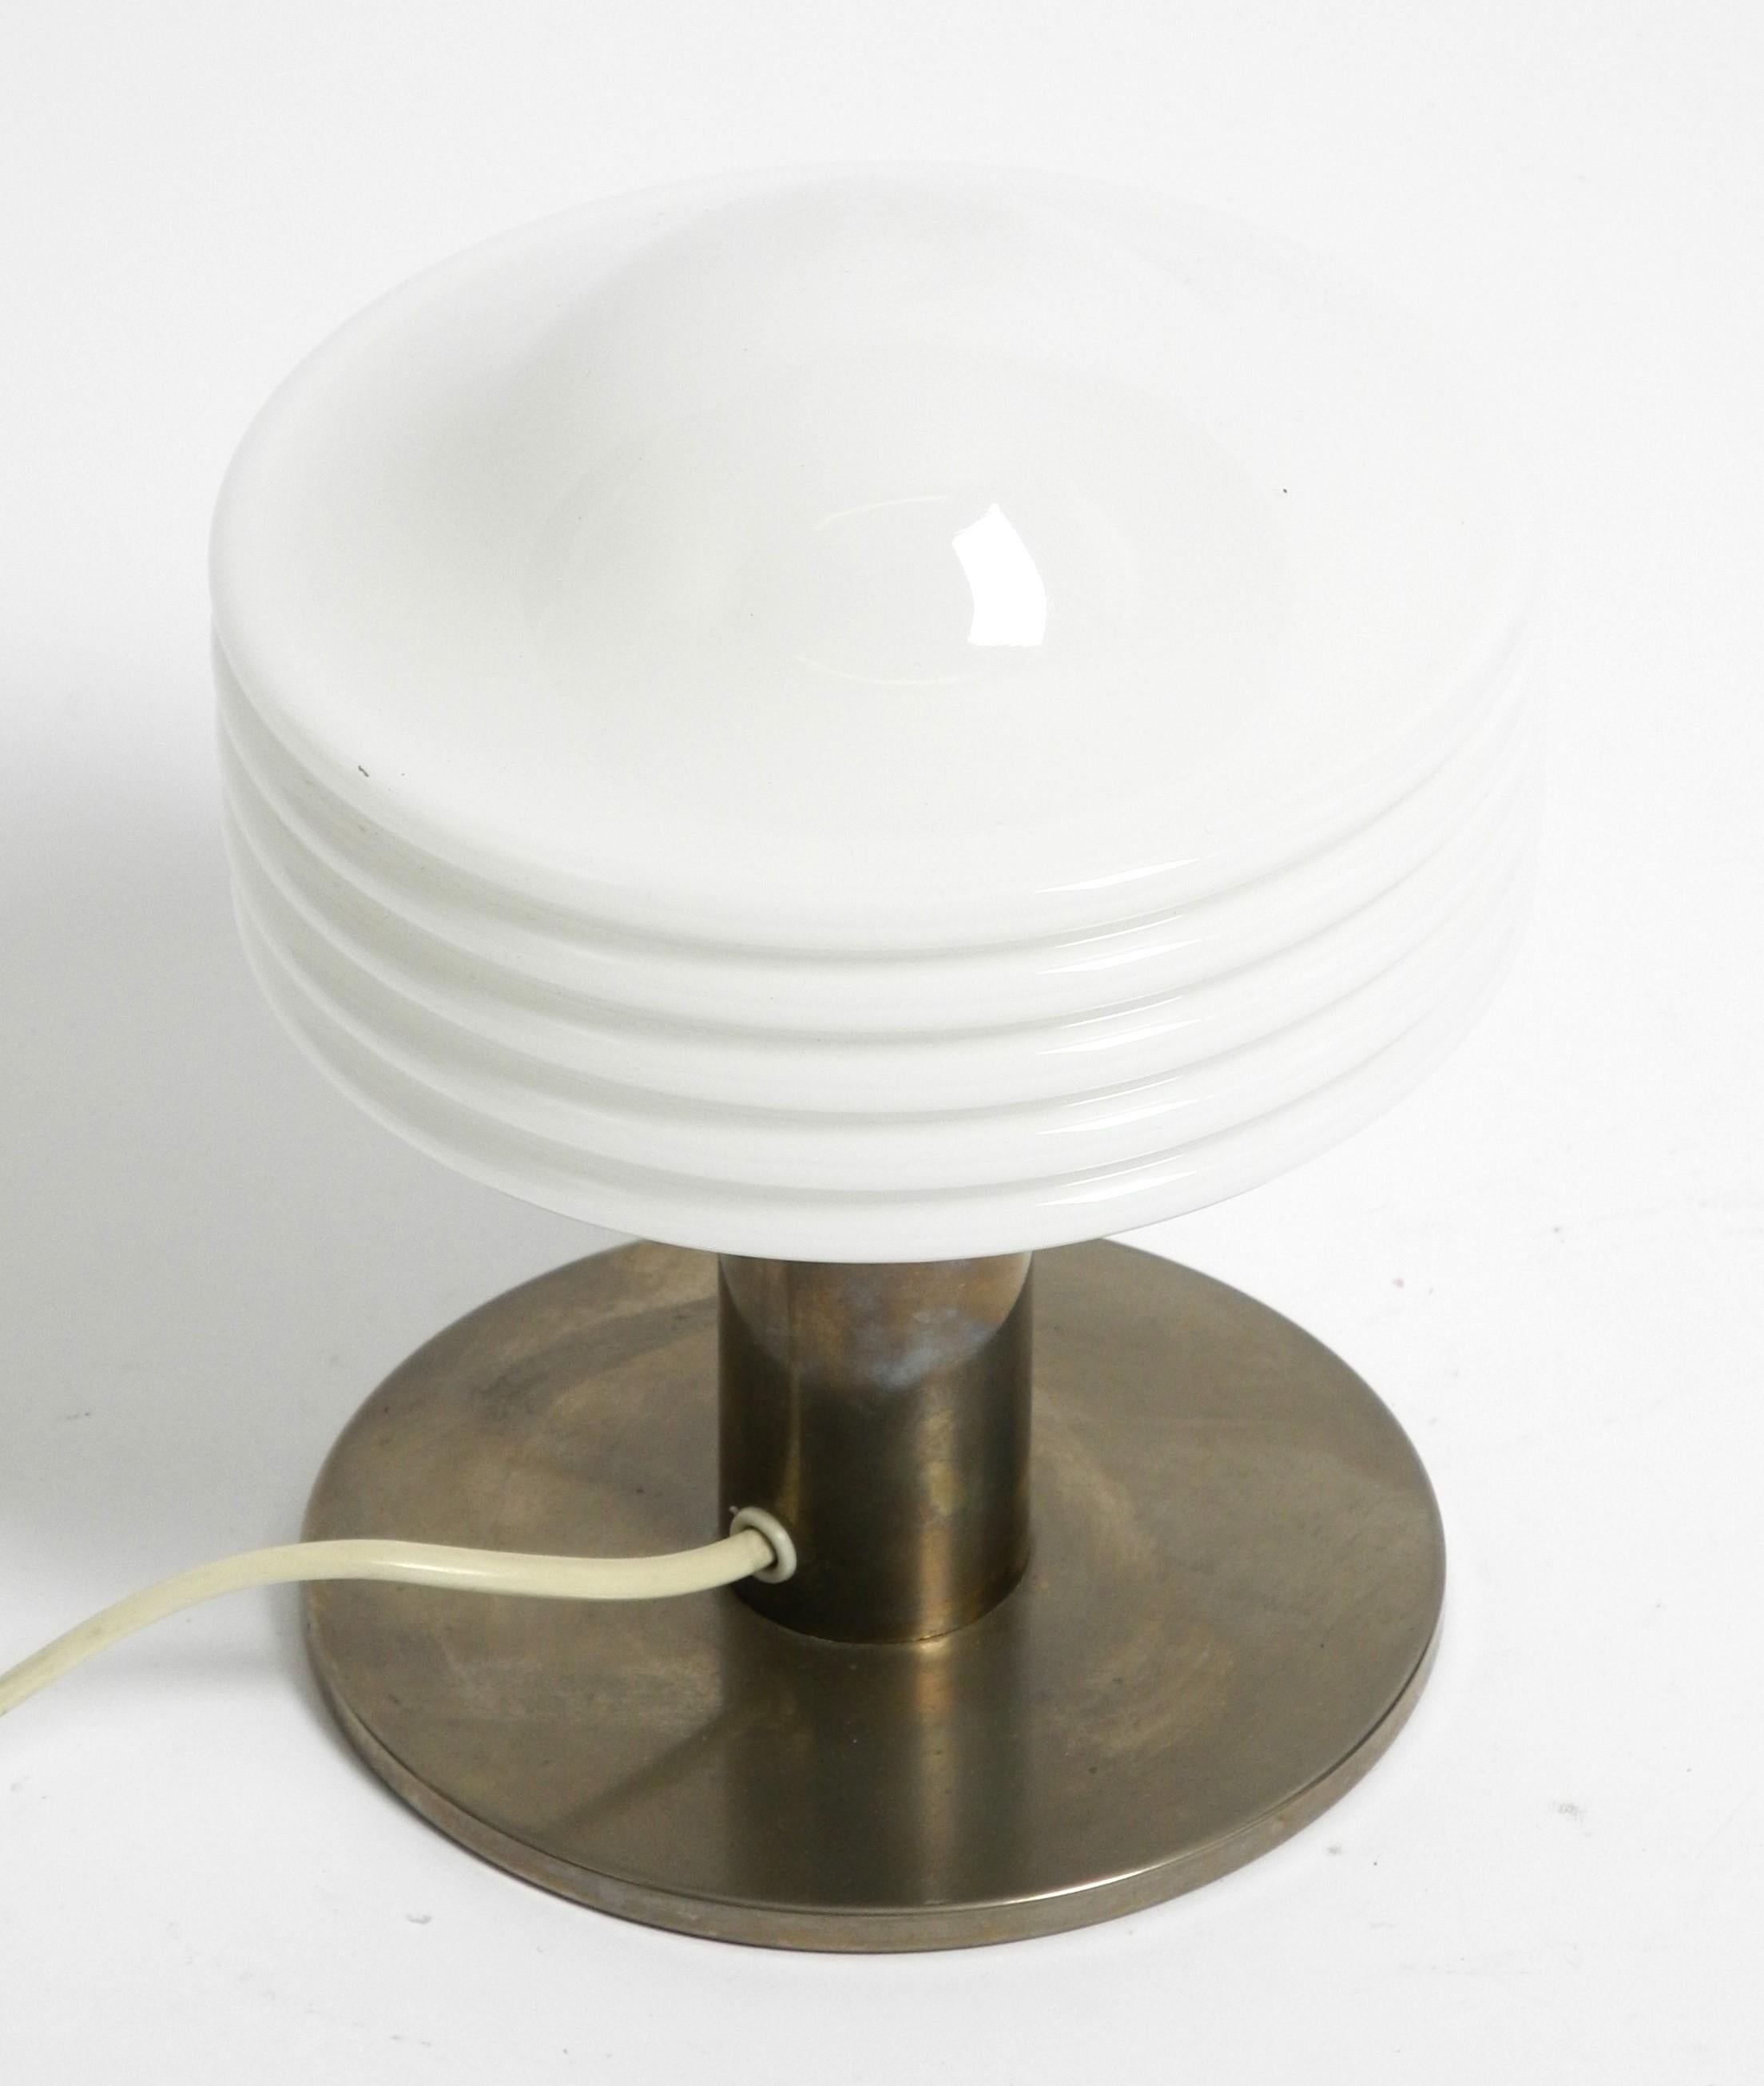 Late 20th Century Beautyful Space Age Table Lamp by Temde with Opal Glass Shade, Switzerland 70s